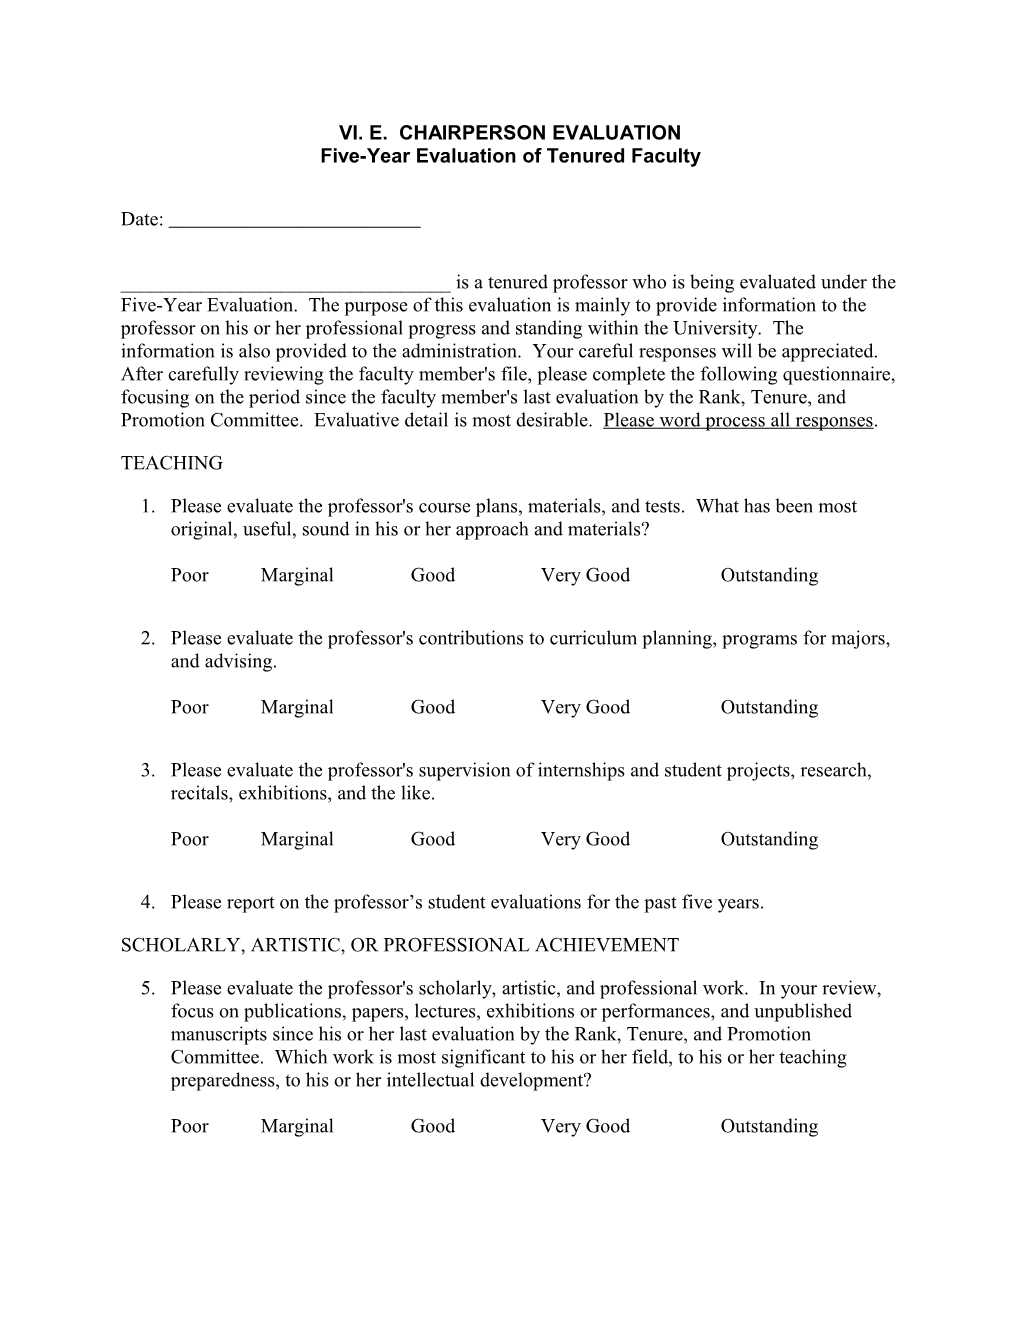 Five-Year Evaluation of Tenured Faculty